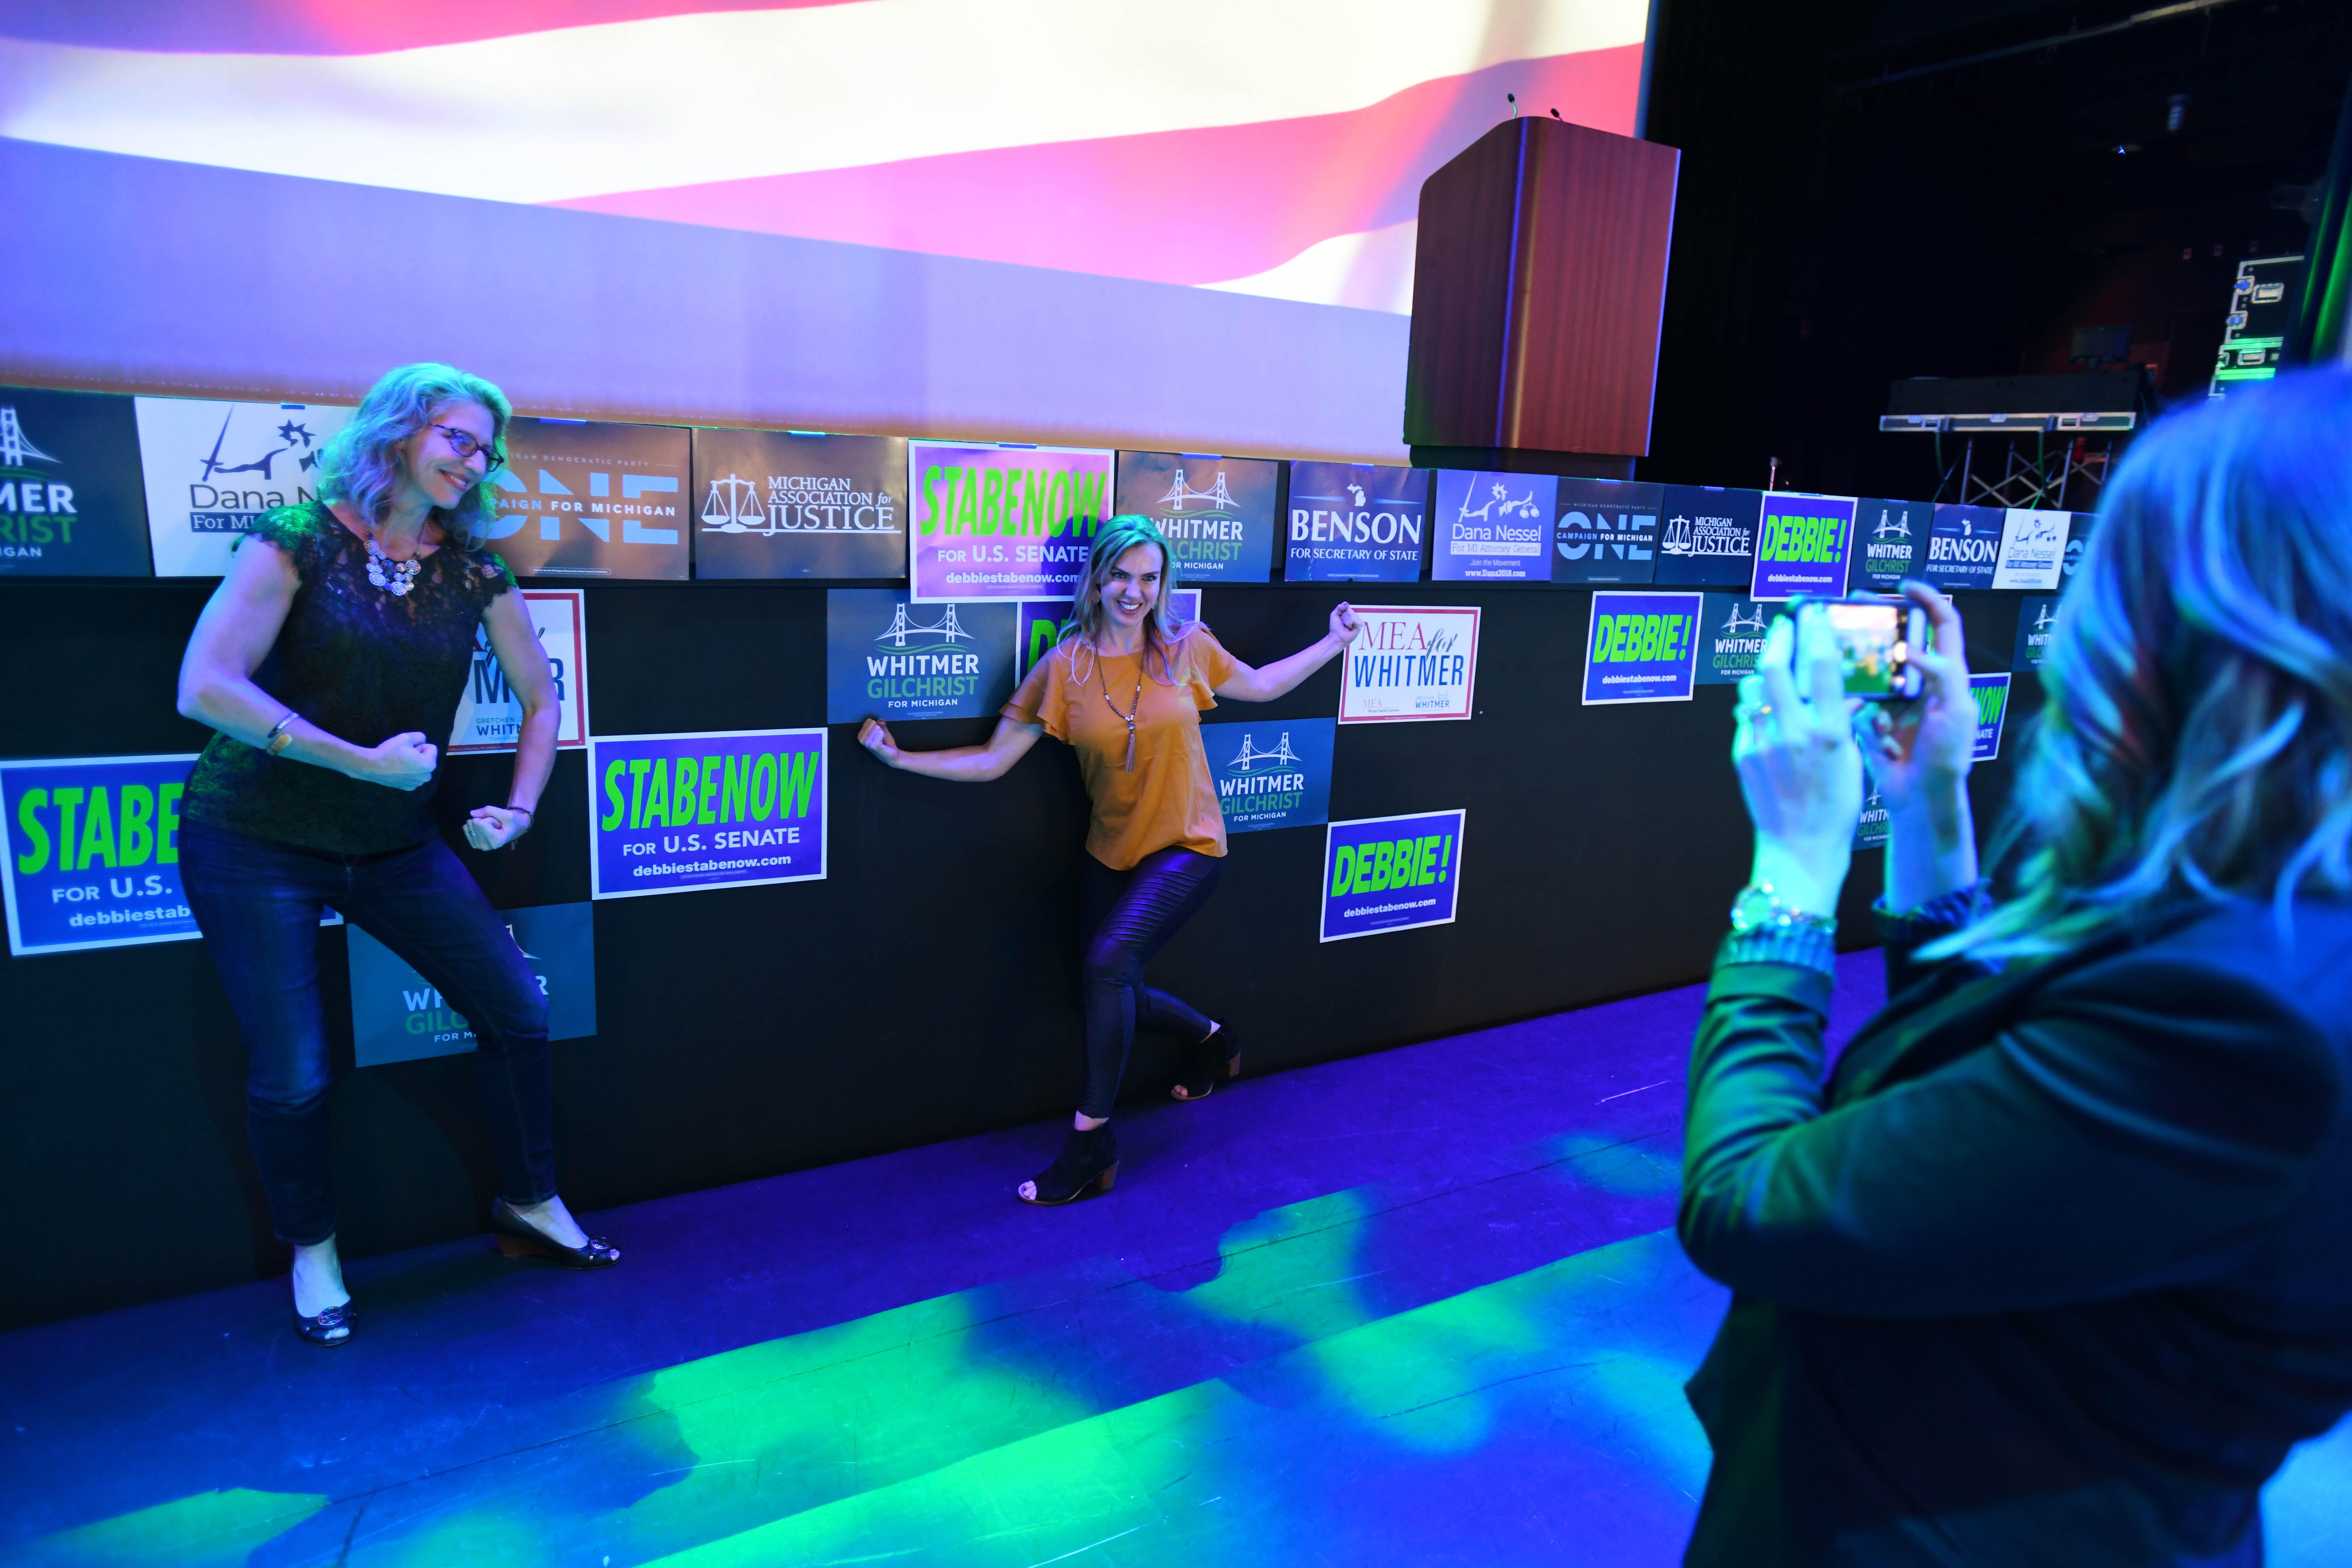 Amy Jonker and Andrea Forsyth have fun posing for a  photo taken by Sara Vroman in front of the stage where the Democrats are hoping Michigan gubernatorial candidate Gretchen Whitmer will announce a victory later Tuesday night.  Democrats gathered at the Sound Board theater in the MotorCity Casino in Detroit.